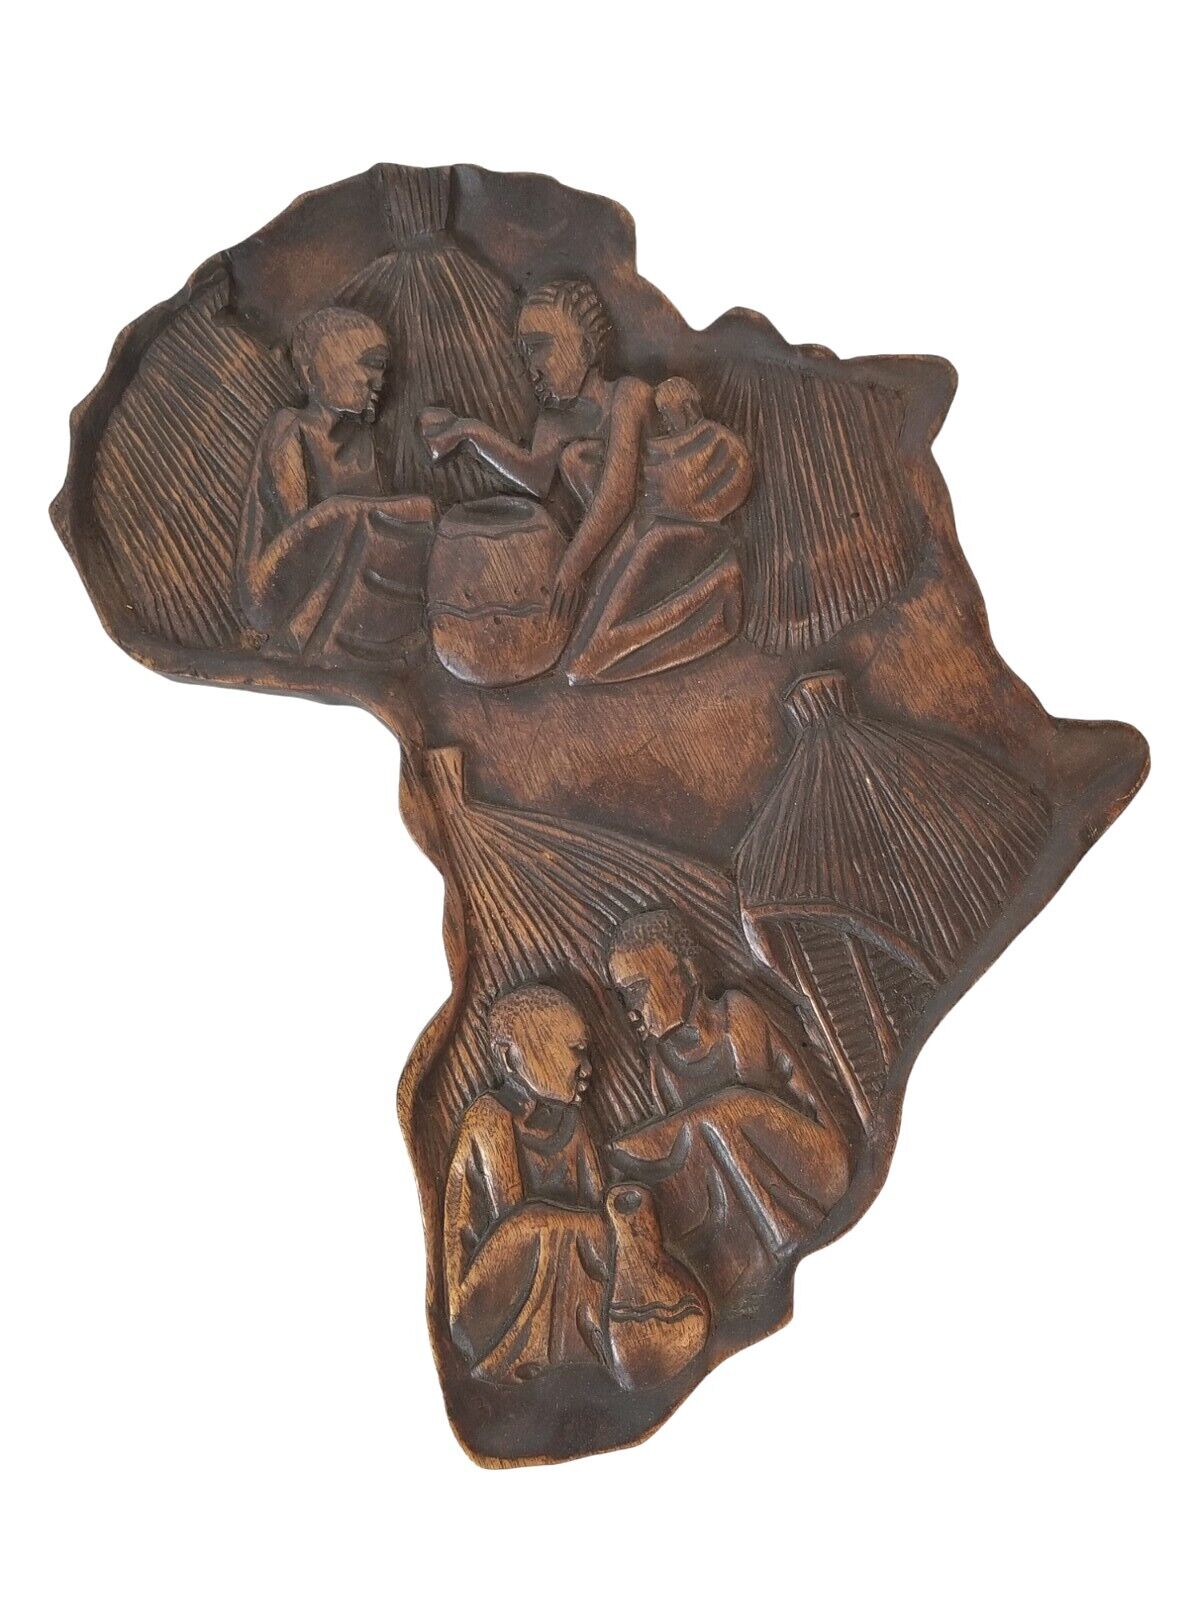 Vintage Hand Carved Wood African continent Ethnic Plaque Art Made in Rwanda